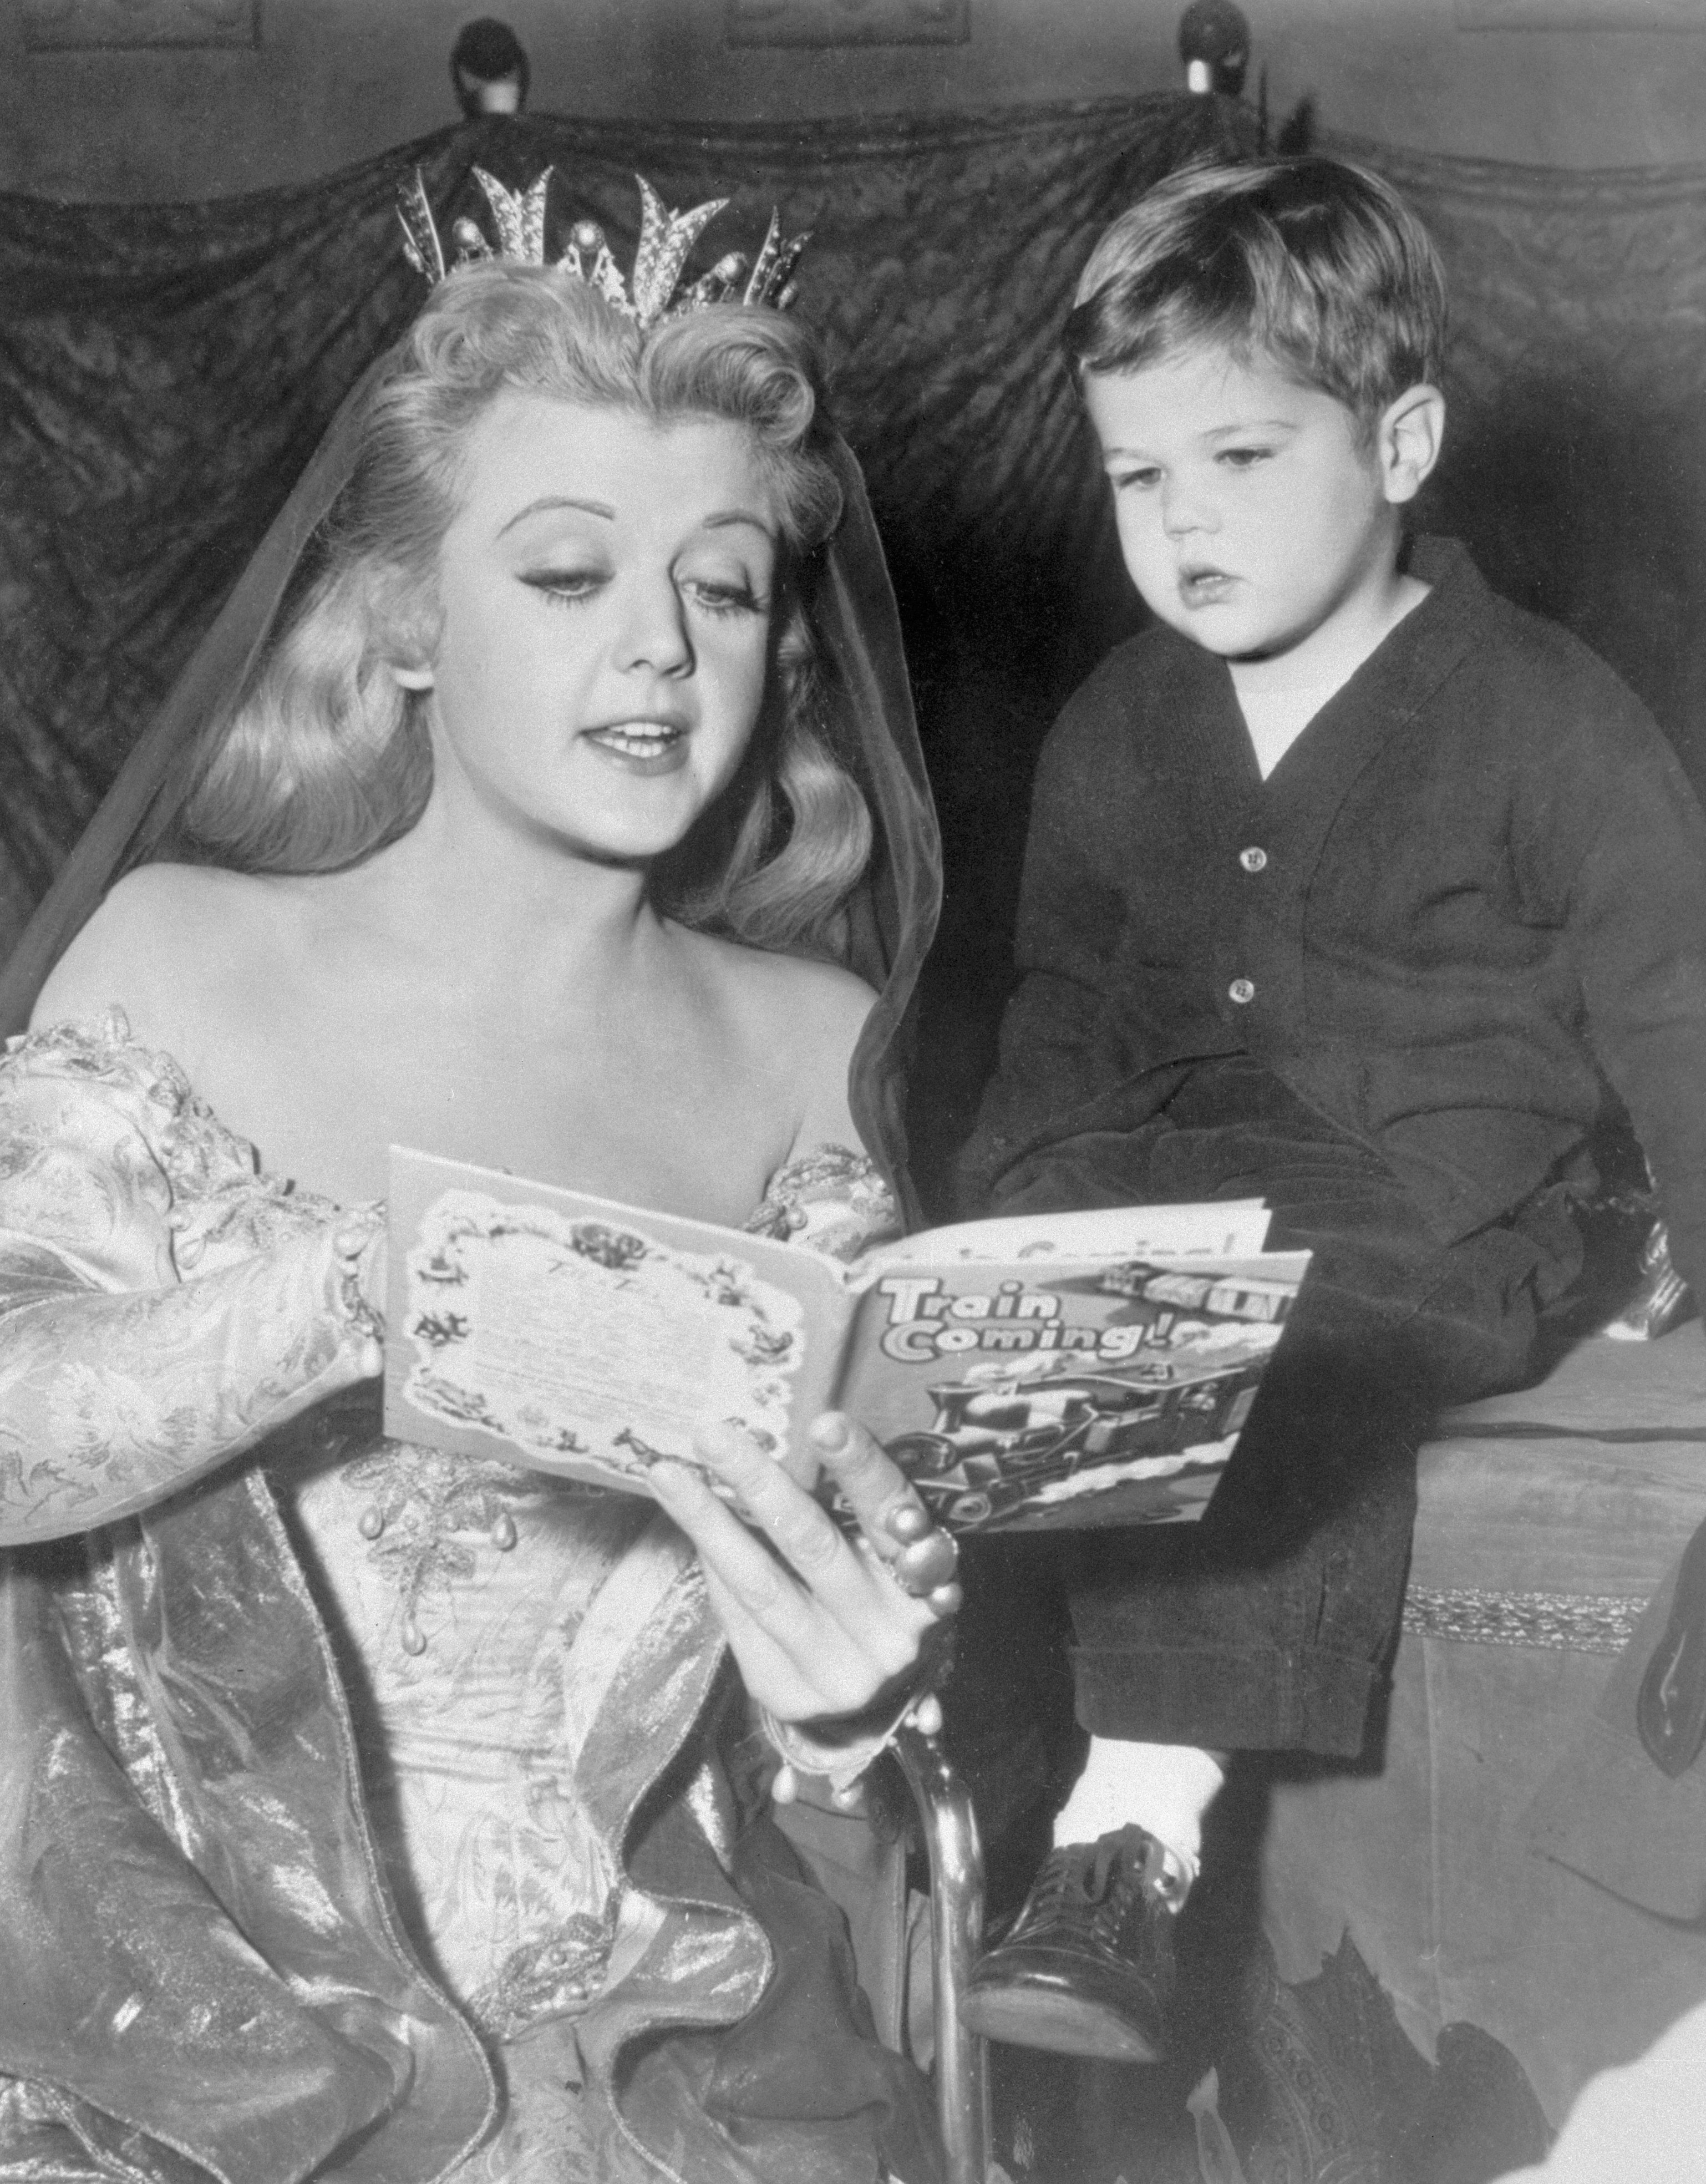 Angela Lansbury amuses a tiny visitor, her son, Michael, by reading a modern fairy tale during a break in Hollywood film work, 1955. | Source: Getty Images